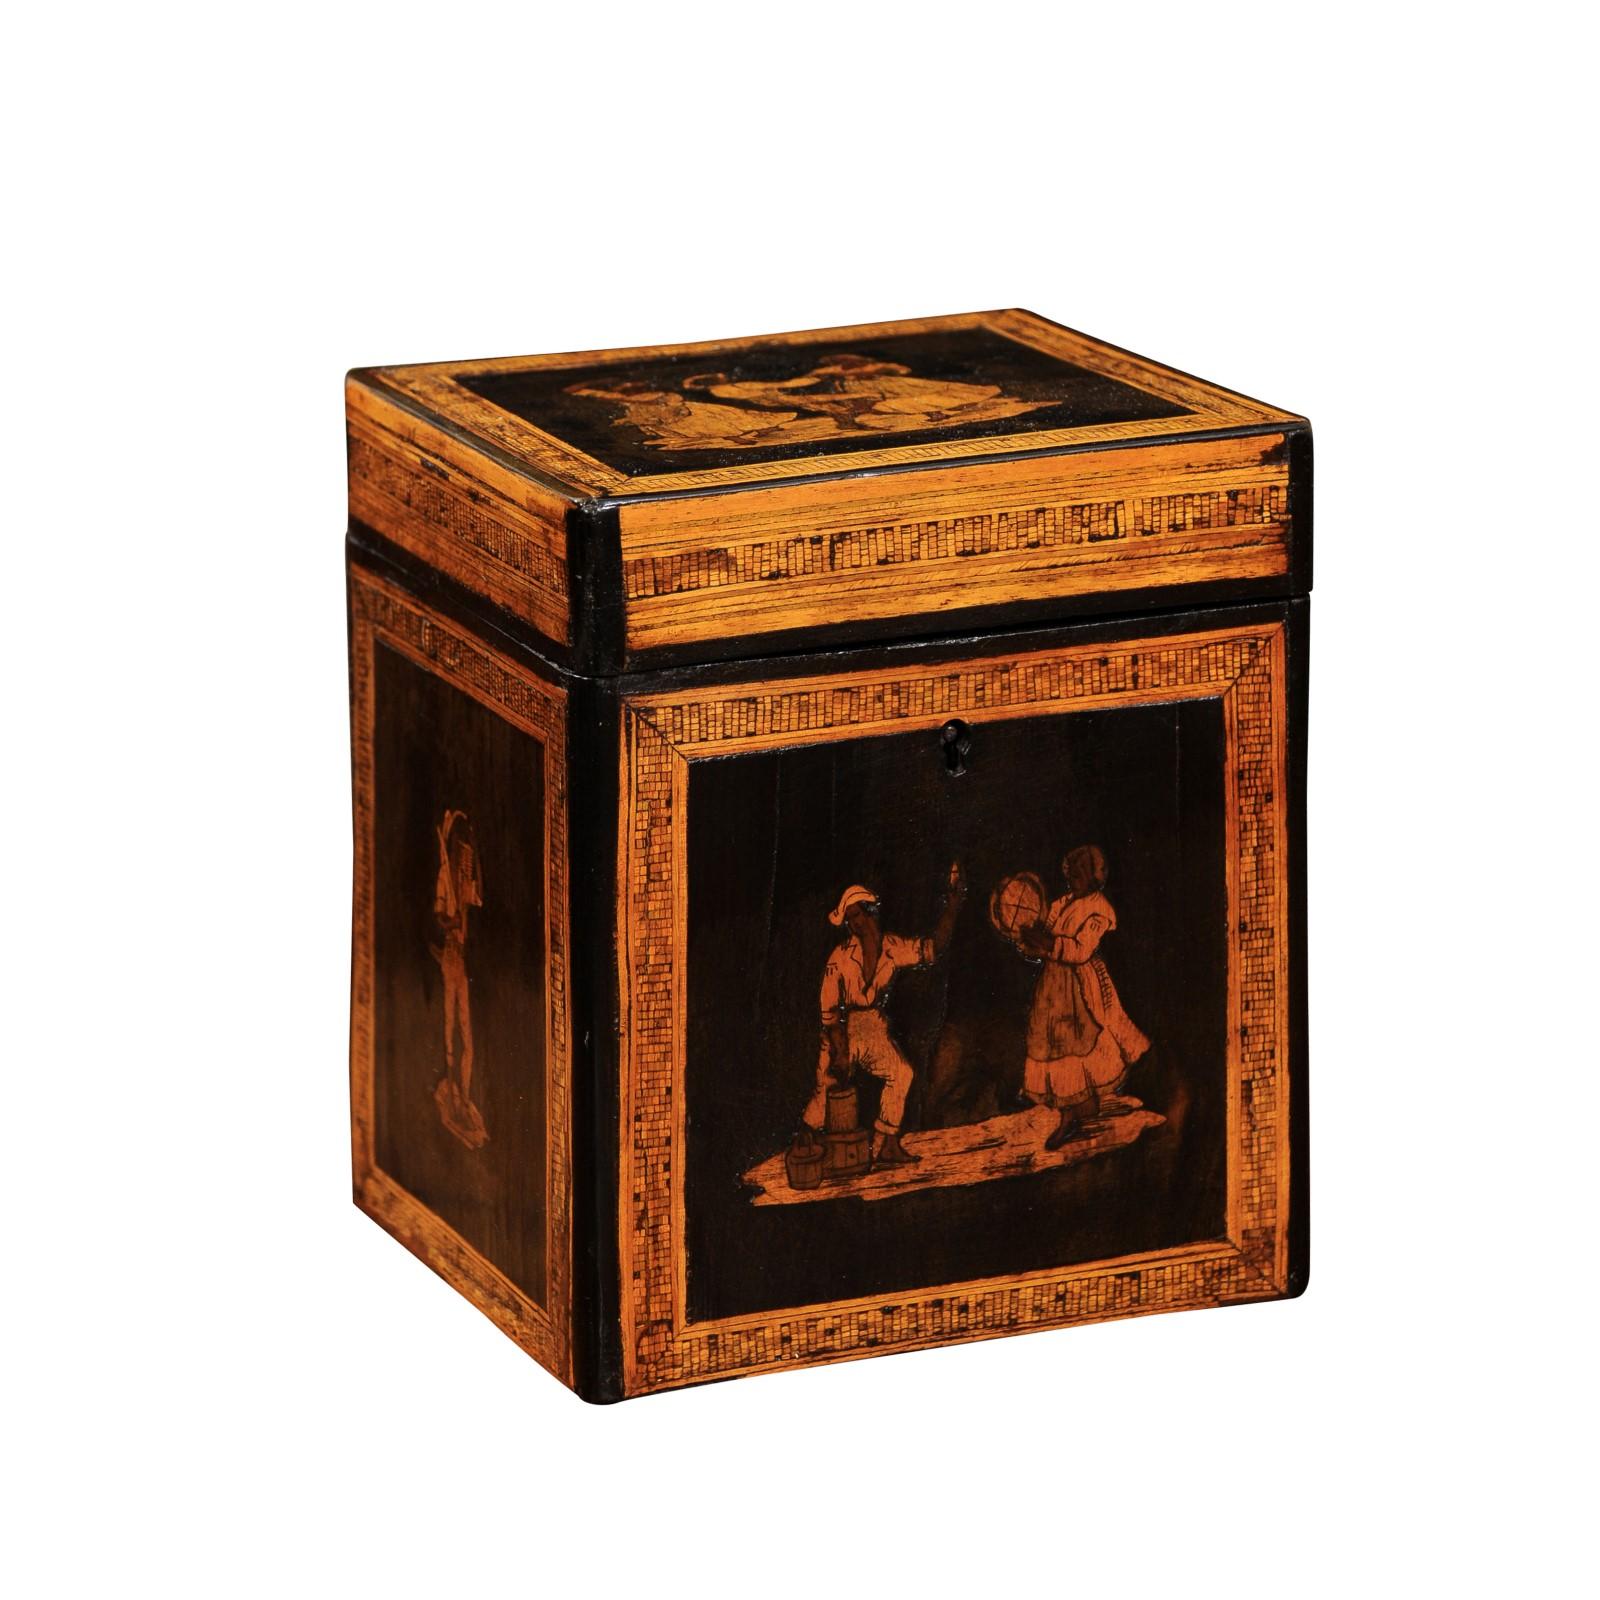 French Early 19th Century Tea caddy Featuring marquetry Inlay of Figures Dancing In Good Condition For Sale In Atlanta, GA